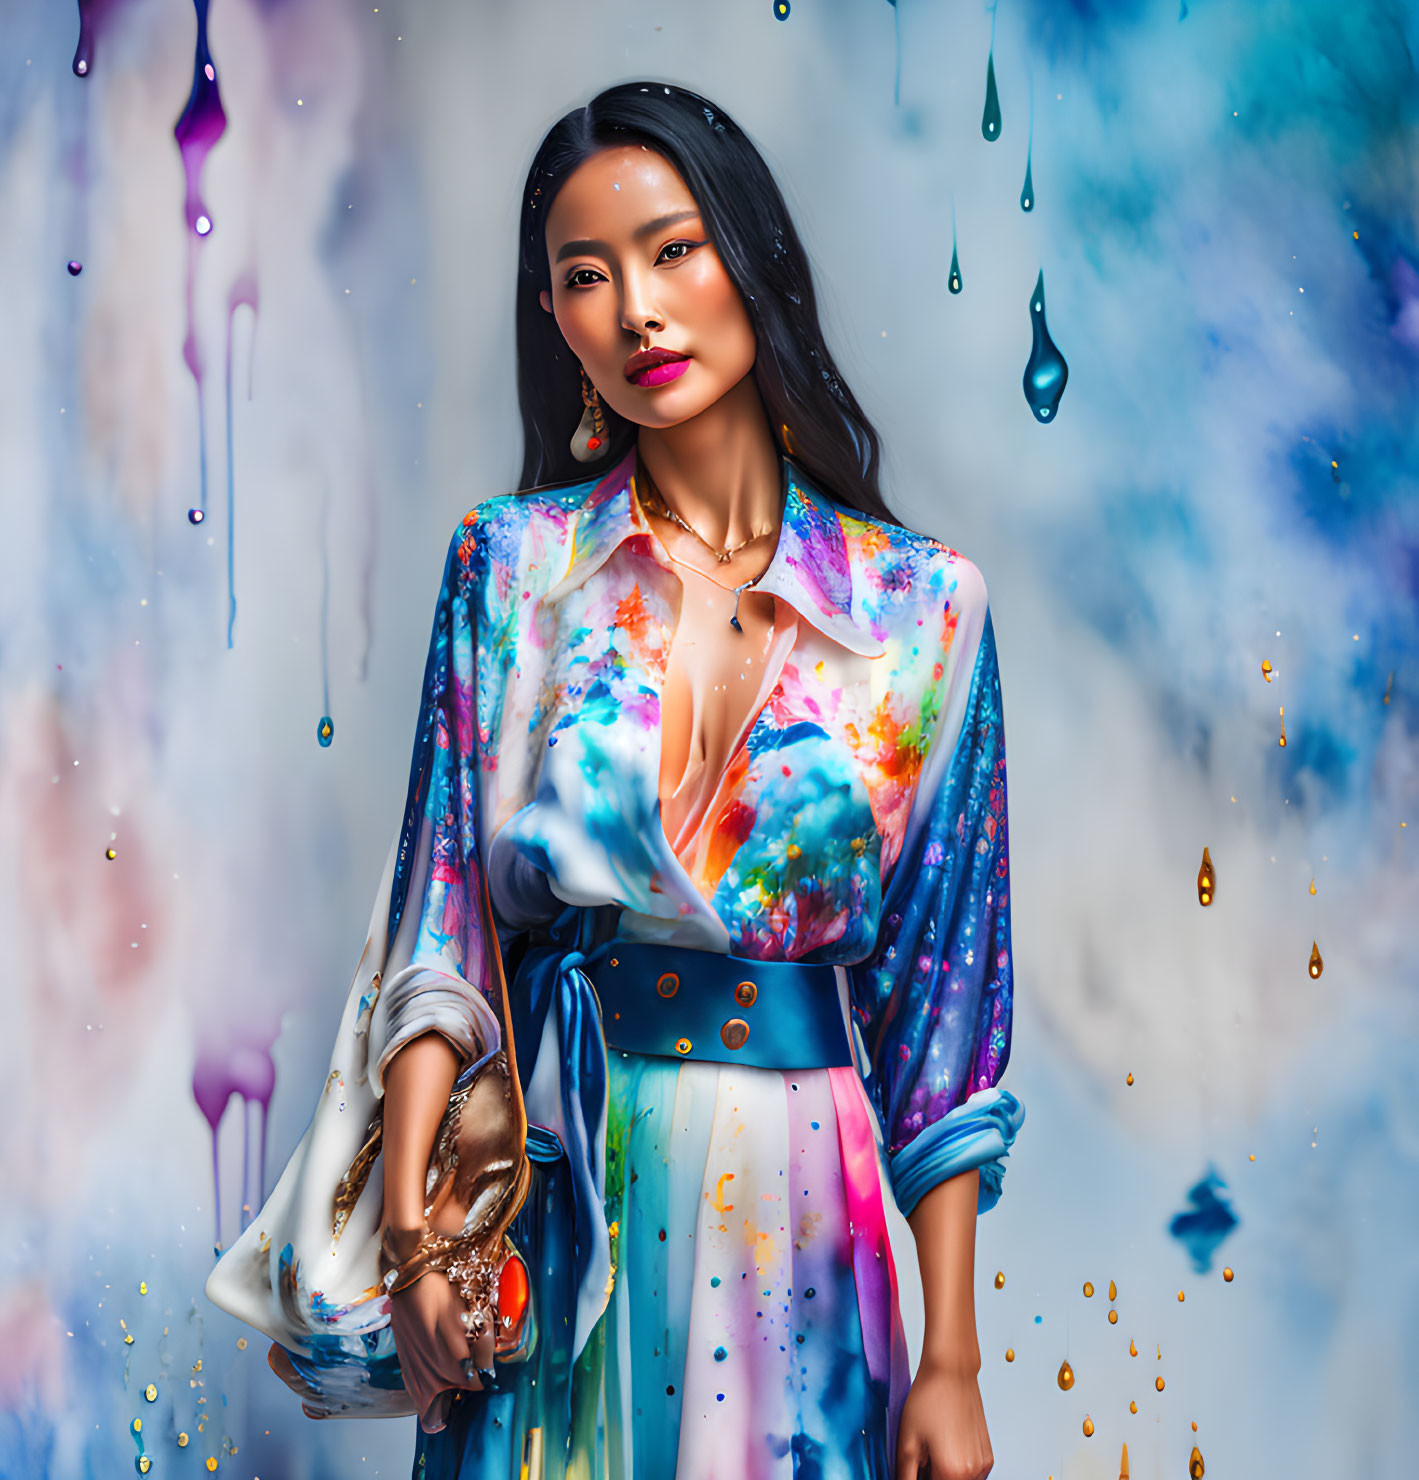 Colorful Woman in Abstract Attire Against Paint-Splattered Background